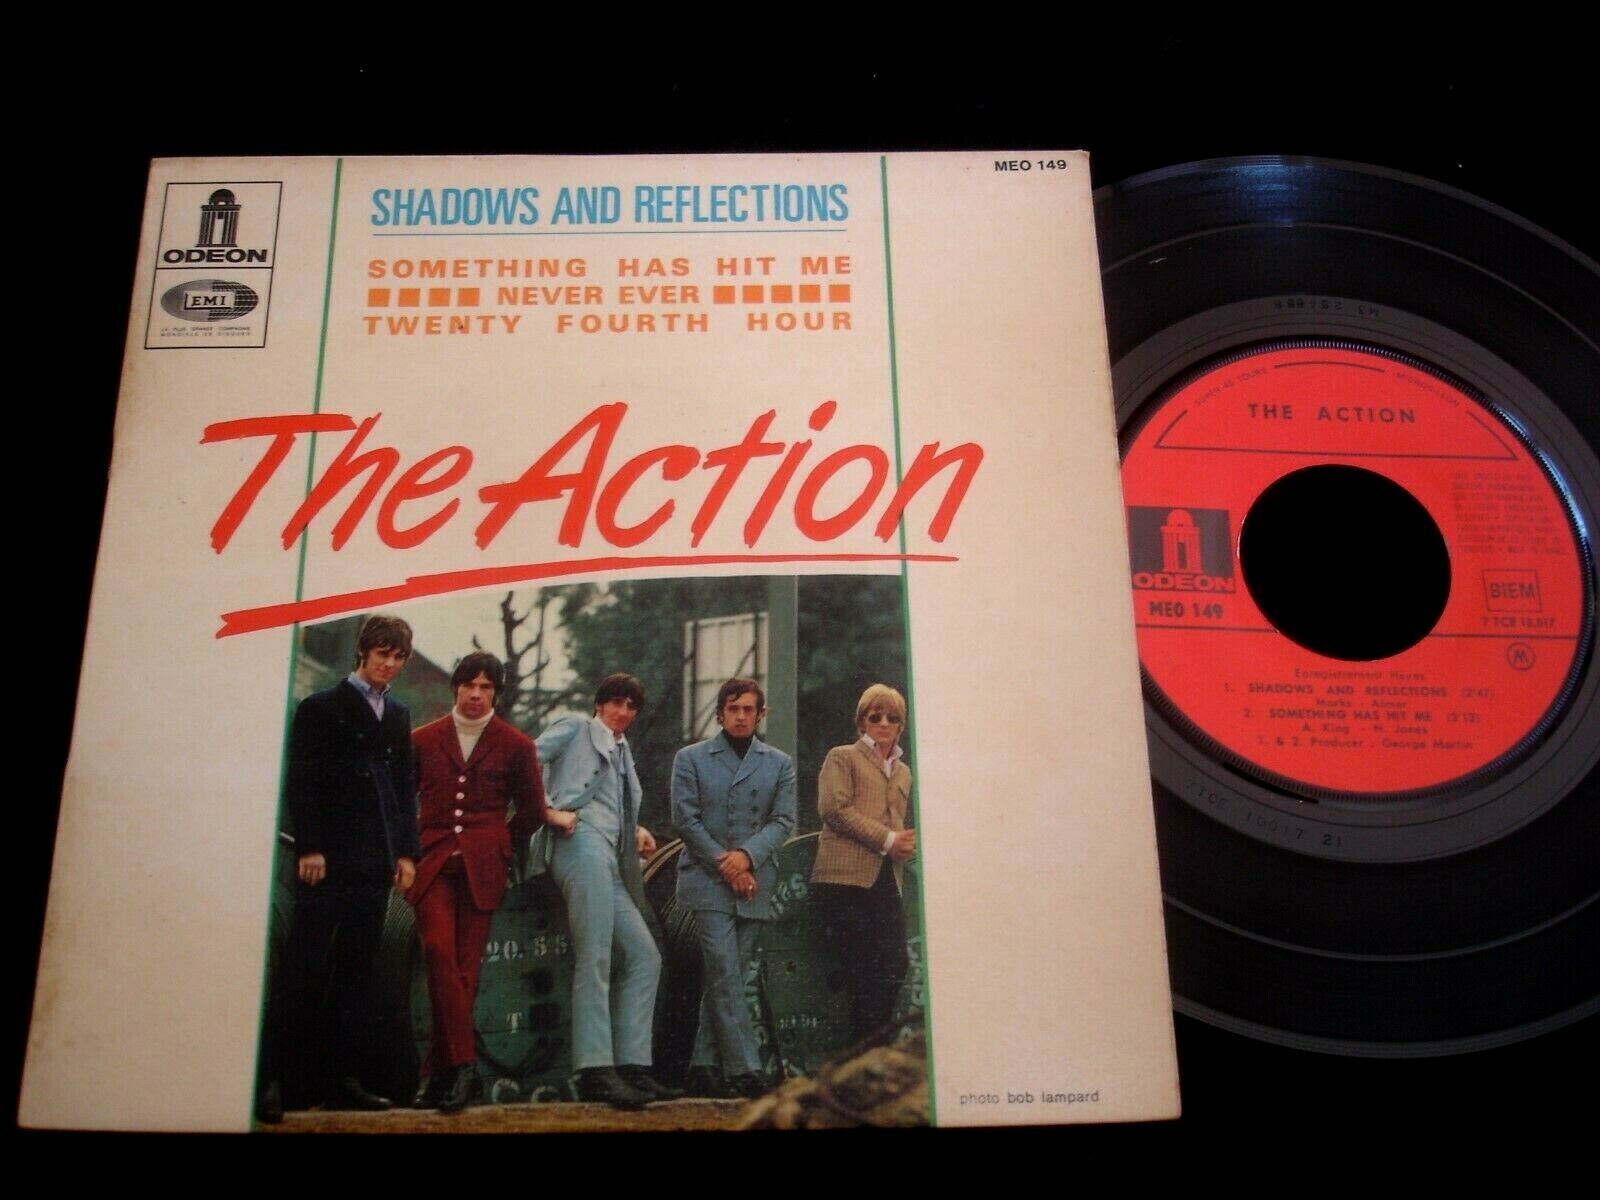 Pic 1 THE ACTION/SHADOWS AND REFLECTIONS/60'S BEAT/RARE ODEON FRENCH PRESS 7" EP